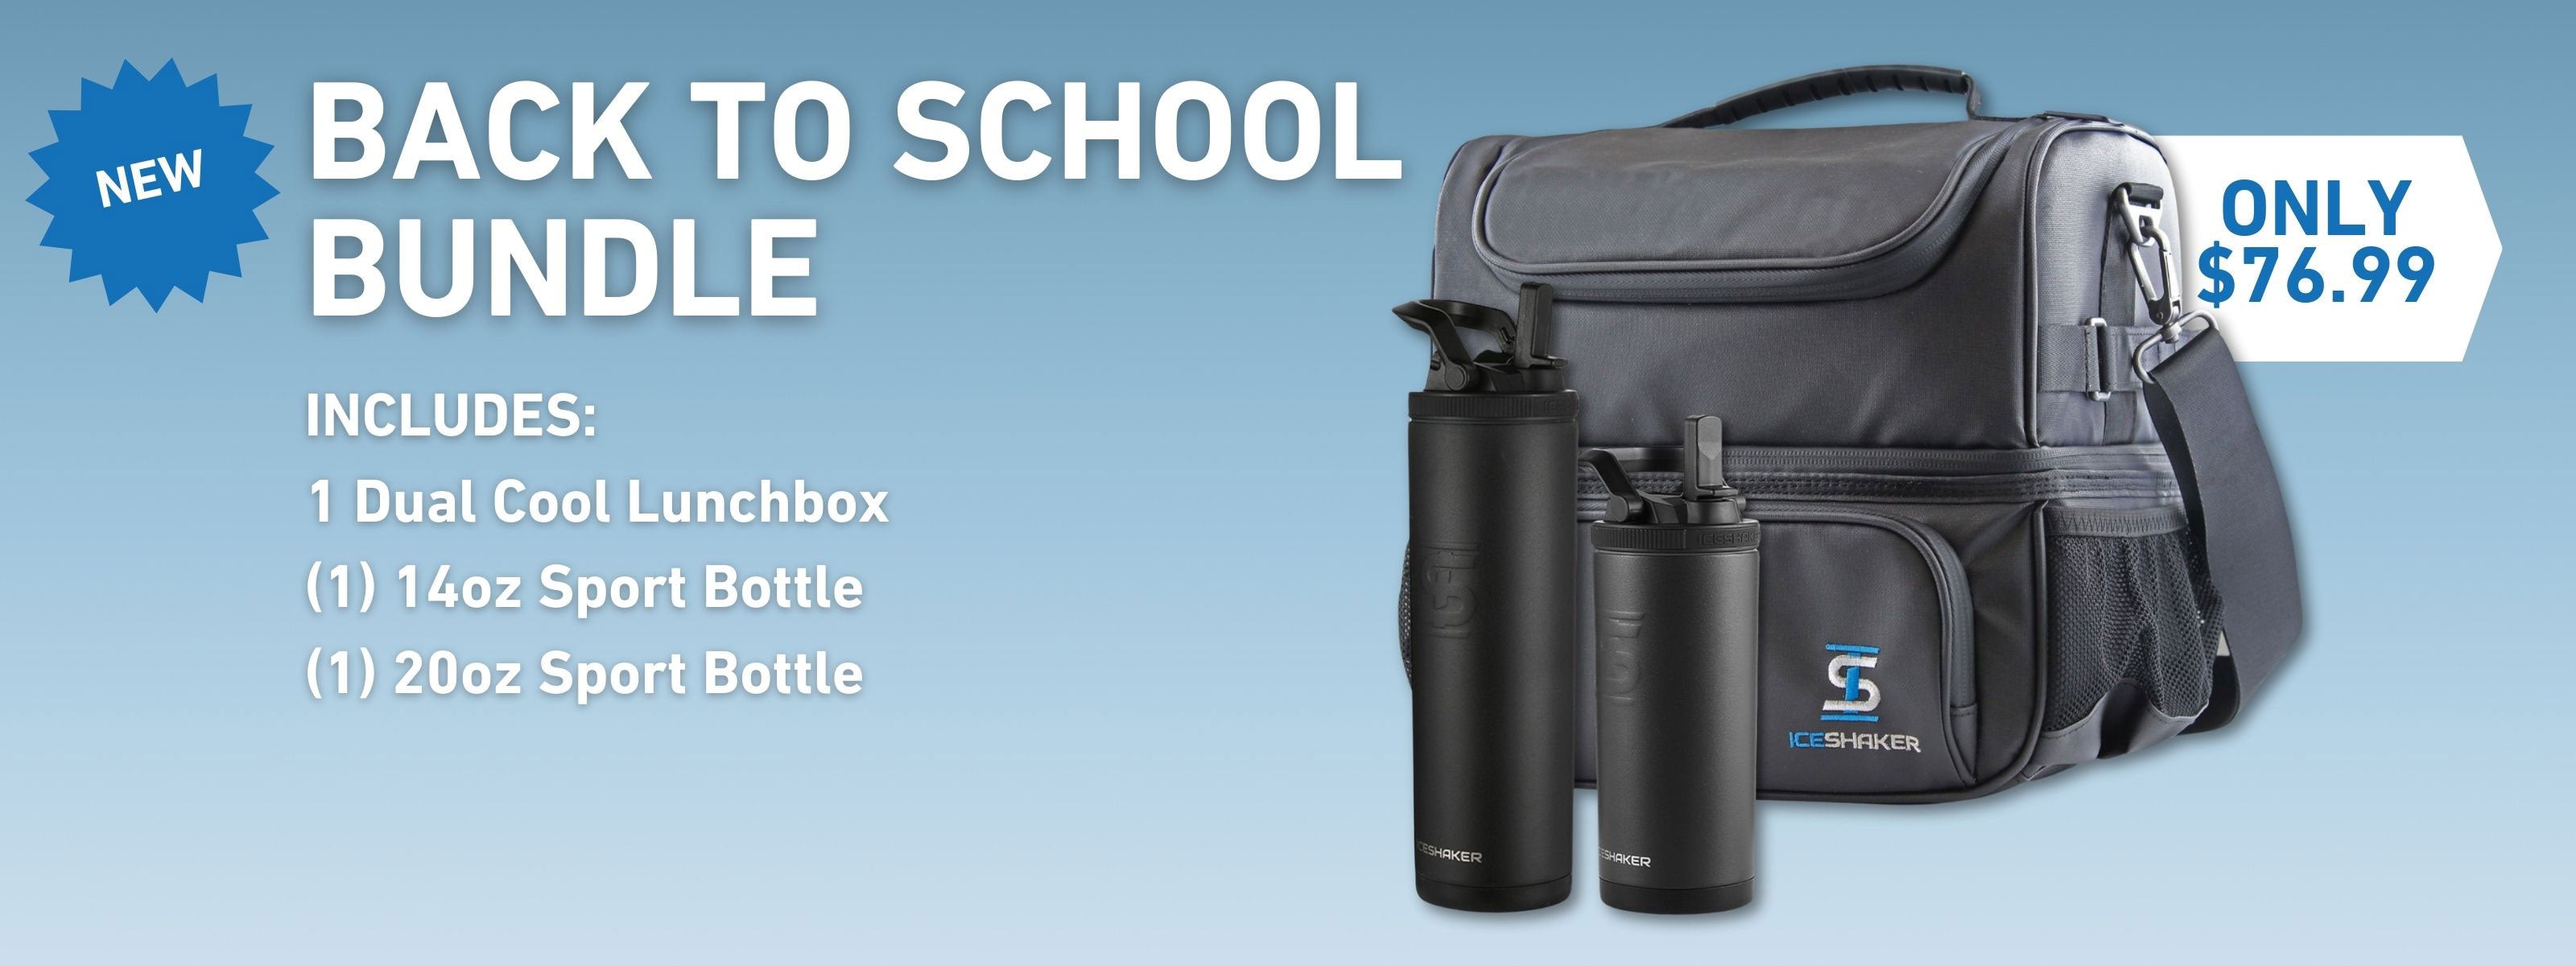 New Back to School Bundle incudes 1 Dual Cool Lunchbox, 1 14oz sport bottle, and 1 20oz Sport Bottle for just $76.99. Click to shop now